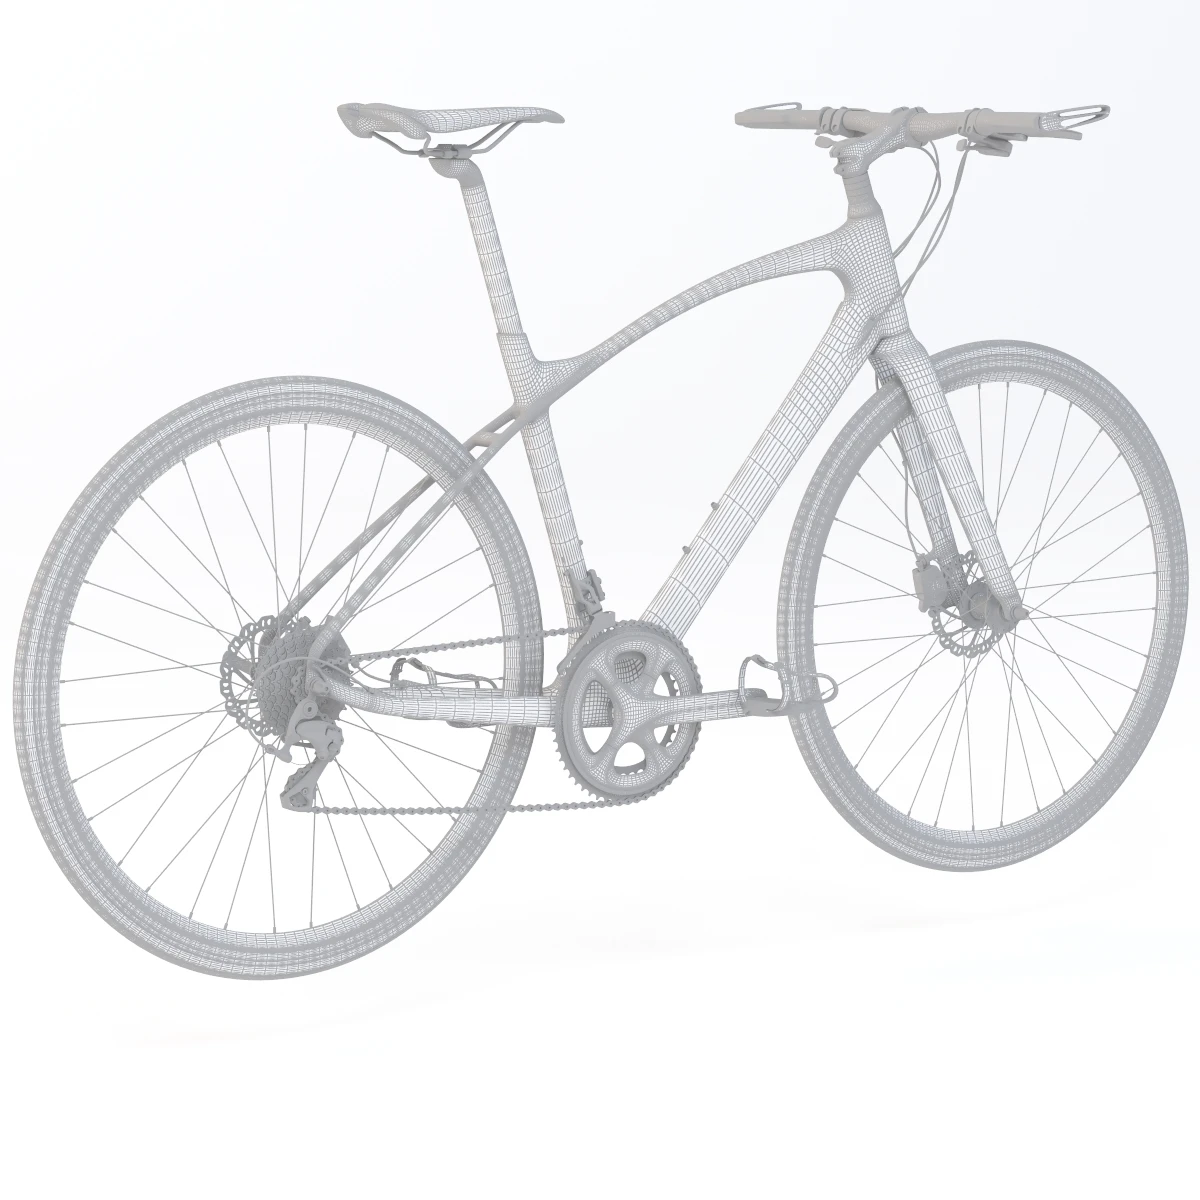 Giant Fastroad Cm1 Black Bicycle 3D Model_018